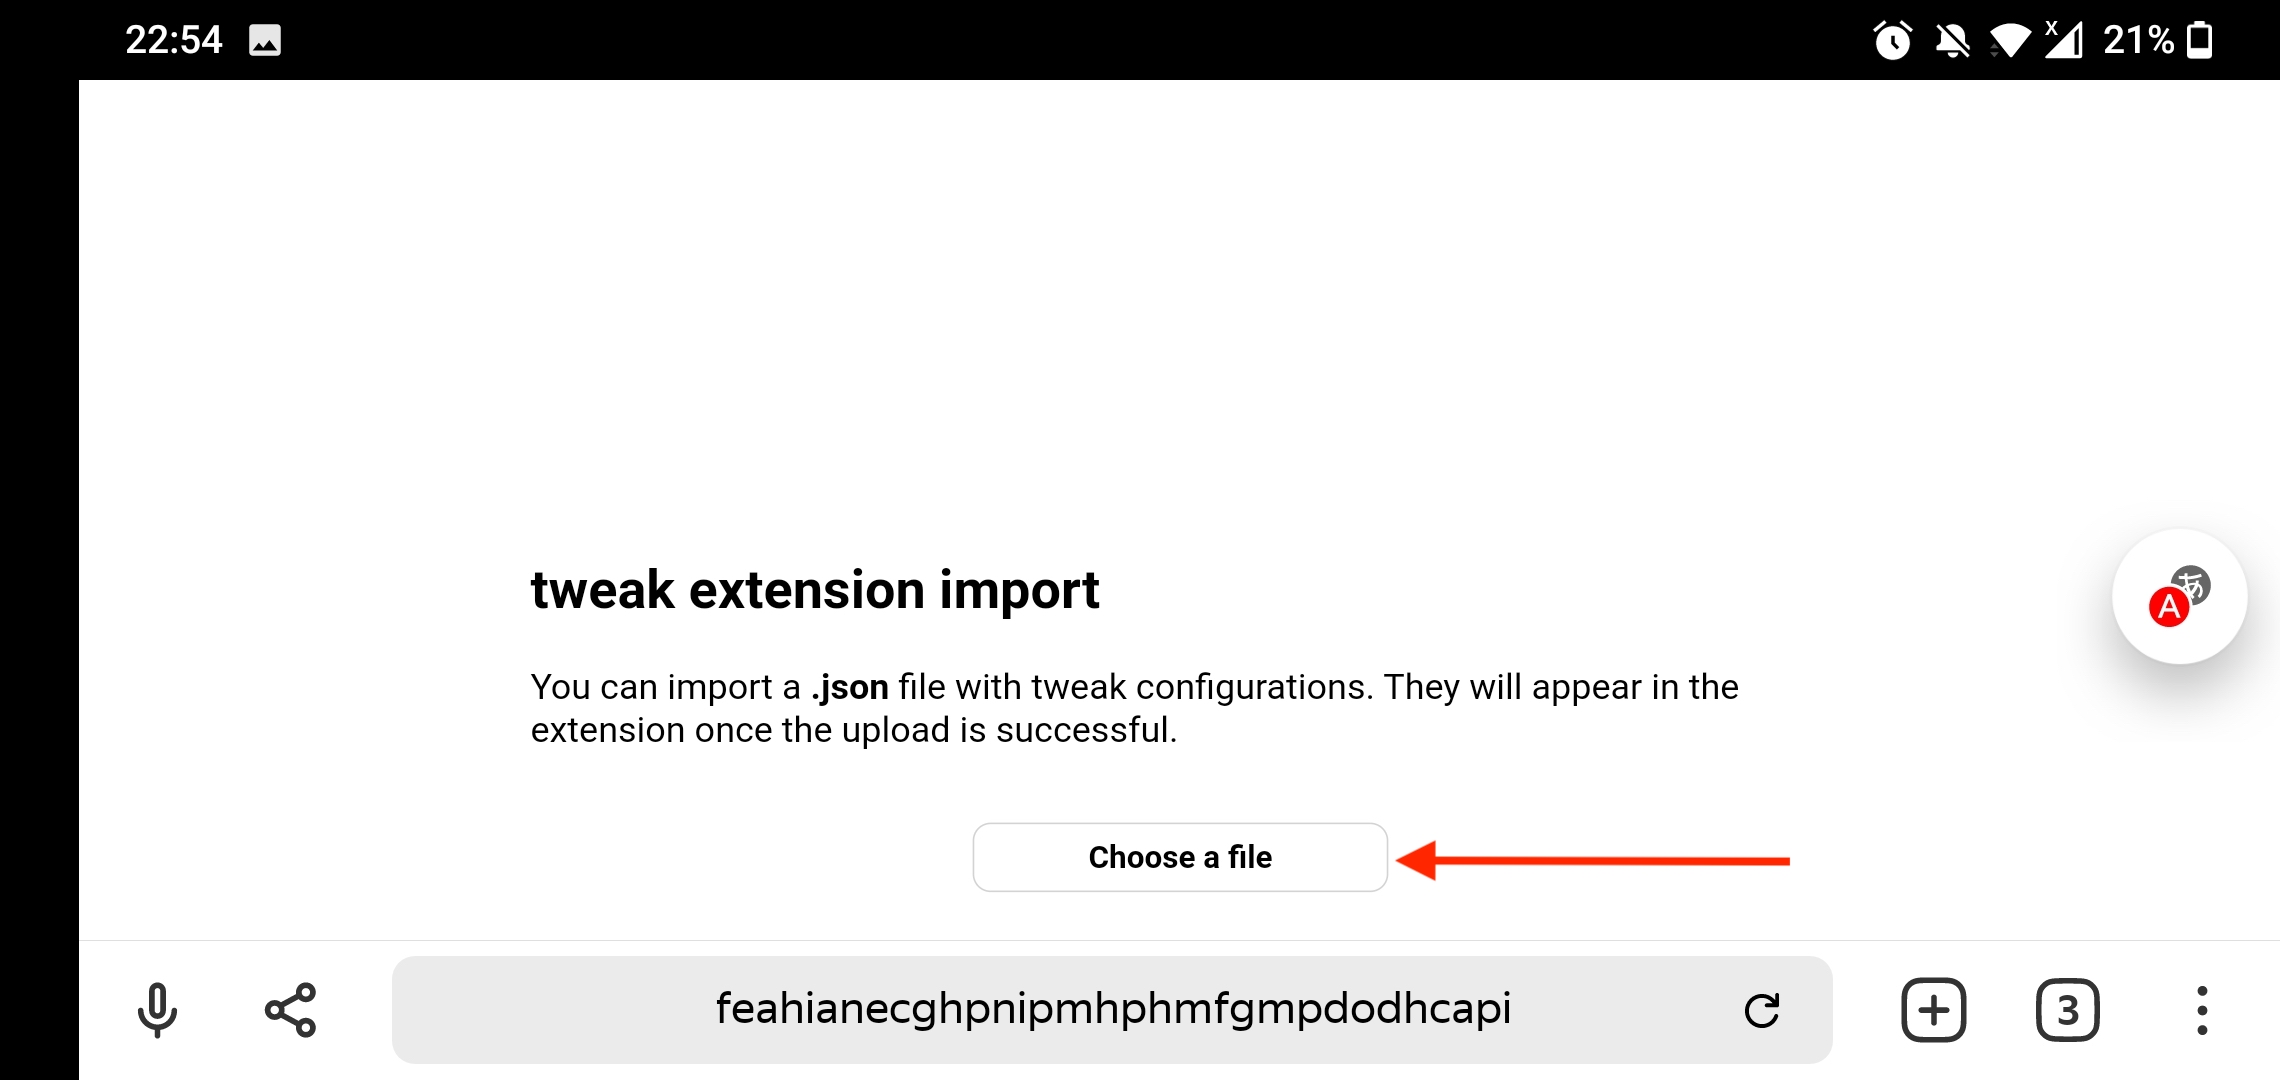 import rule in the yandex browser